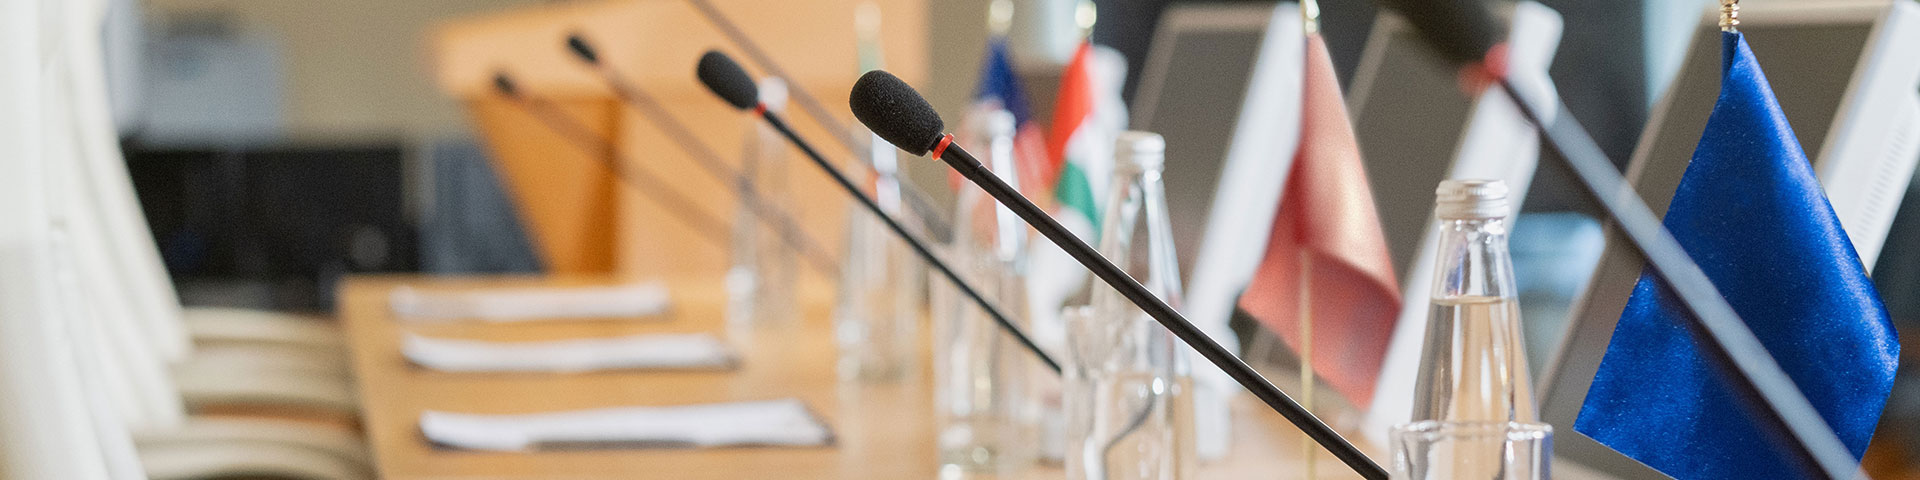 Microphones on a table with various national flags